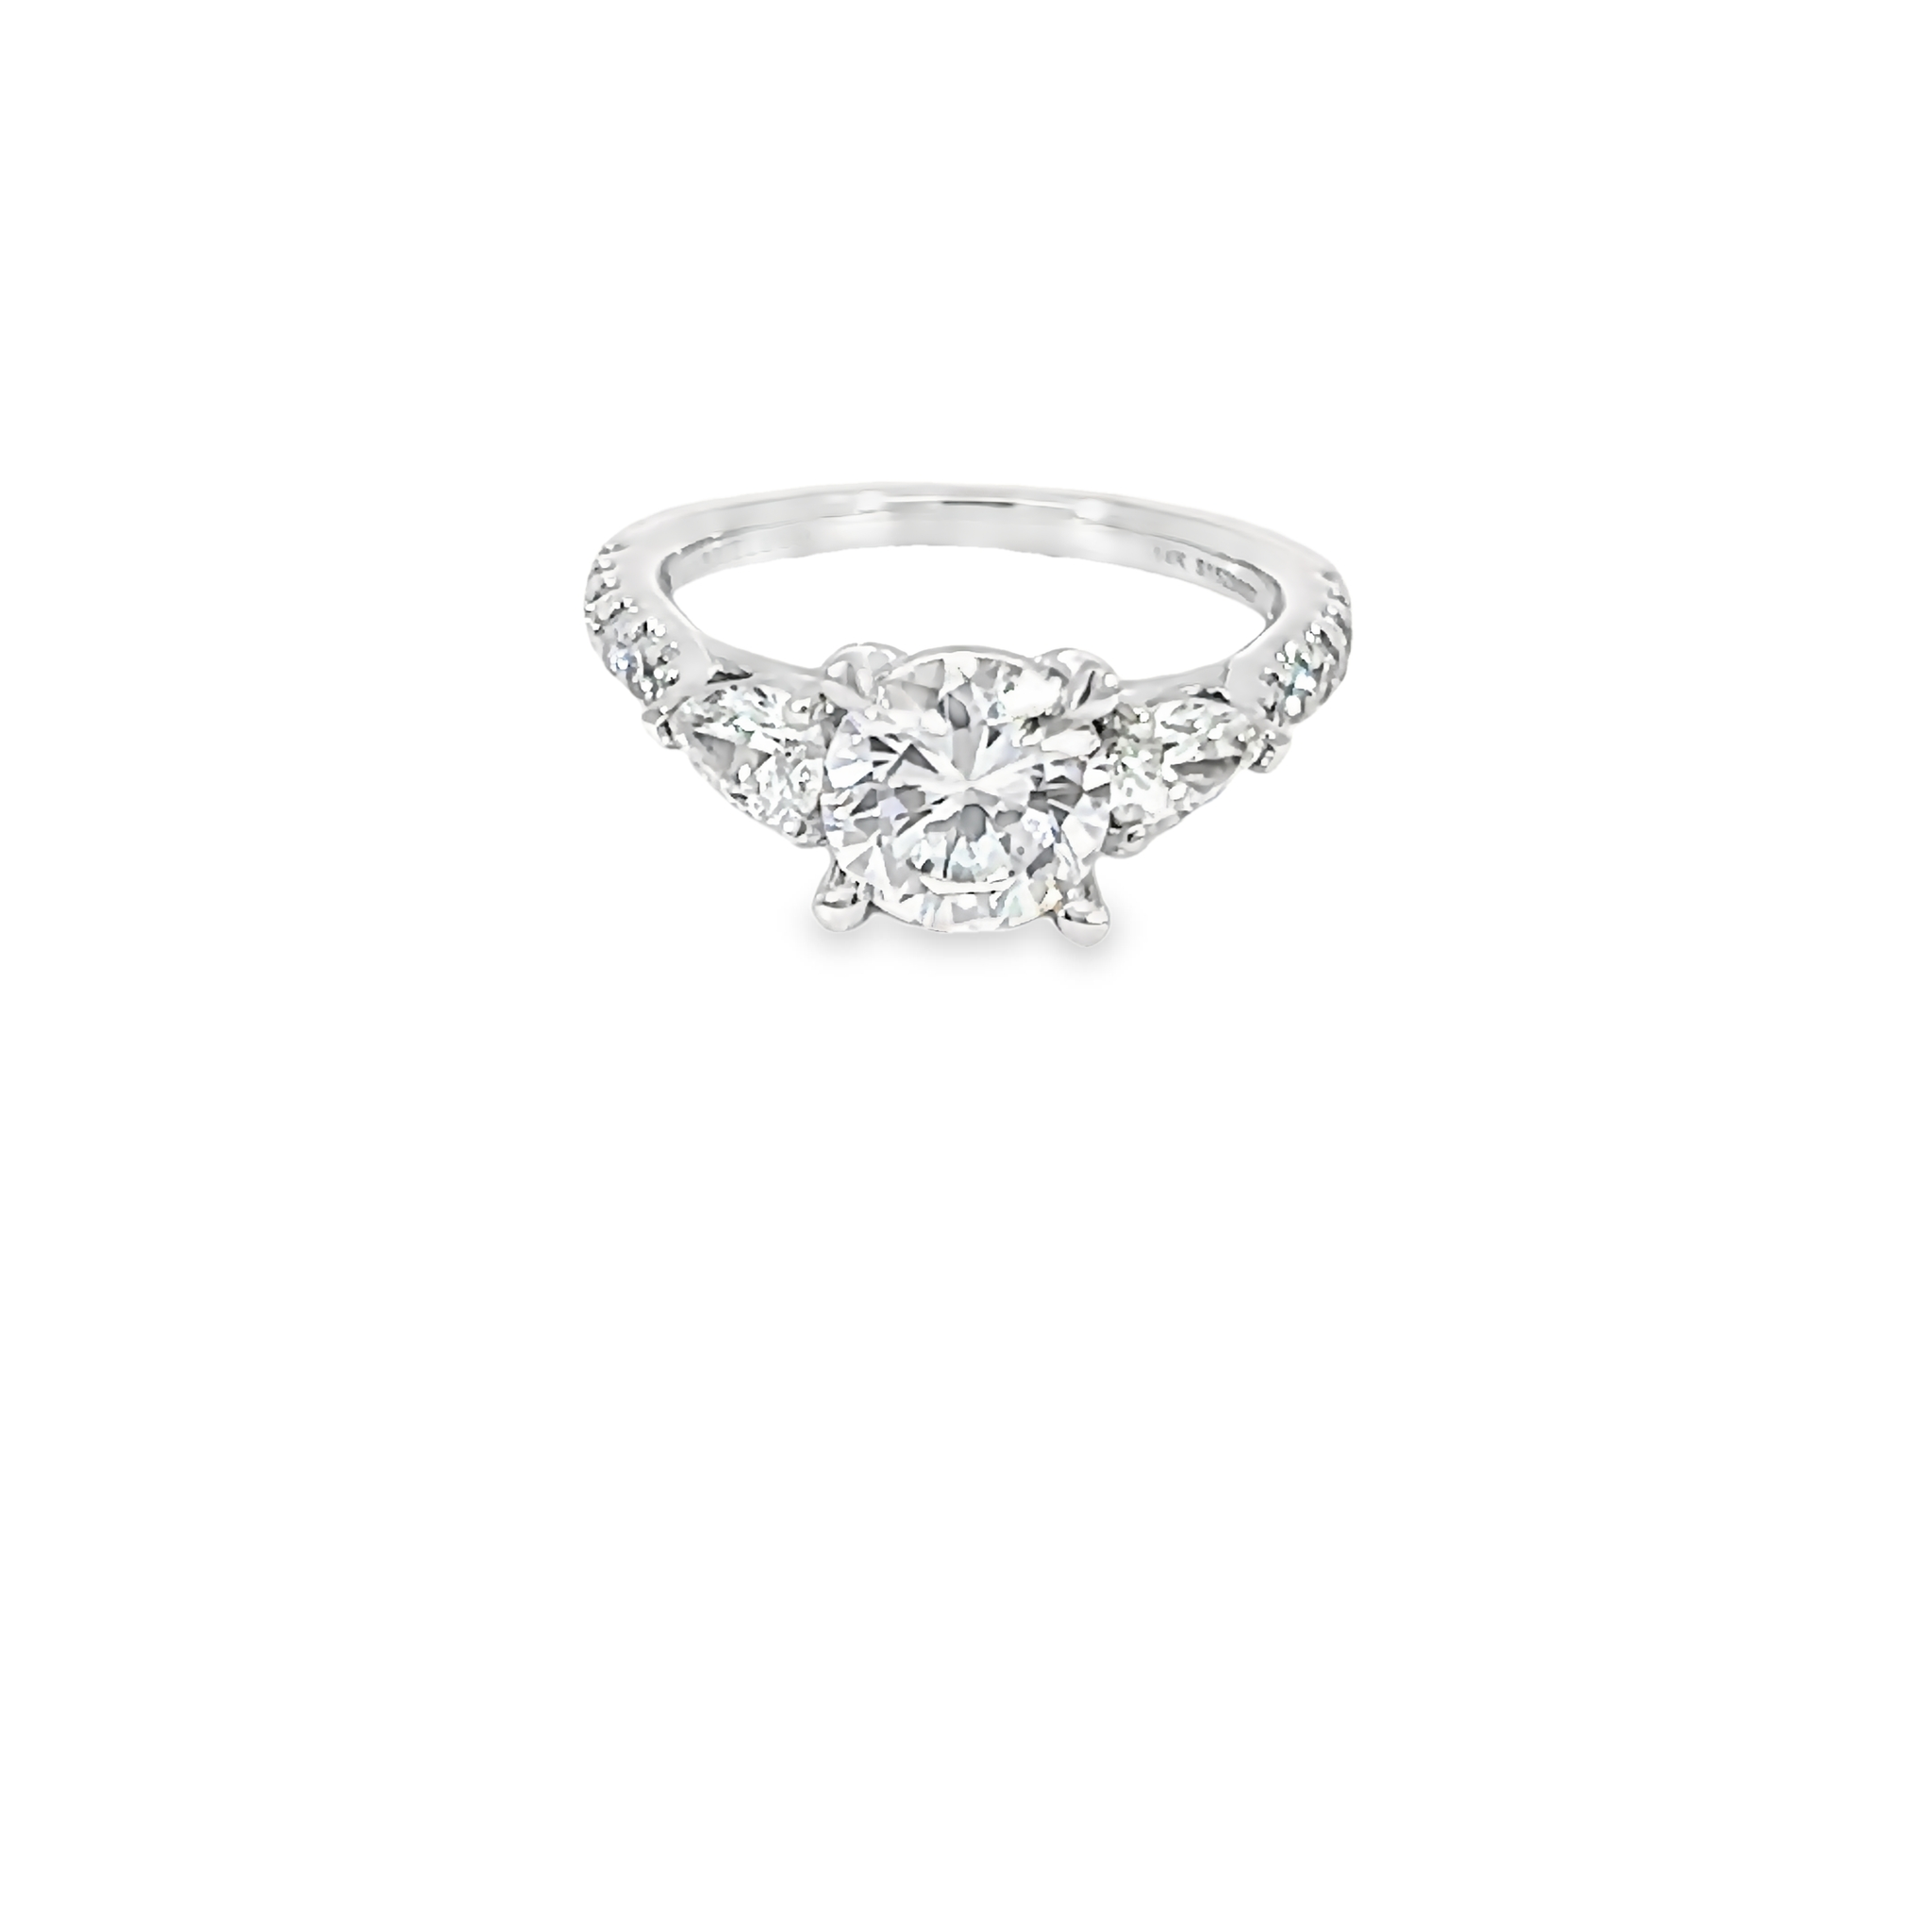 14 Karat White Gold Semi Mount Engagement Ring With 16=0.78 Total Weight Round Brilliant And Pear  G Vs Diamonds. Size 6.25